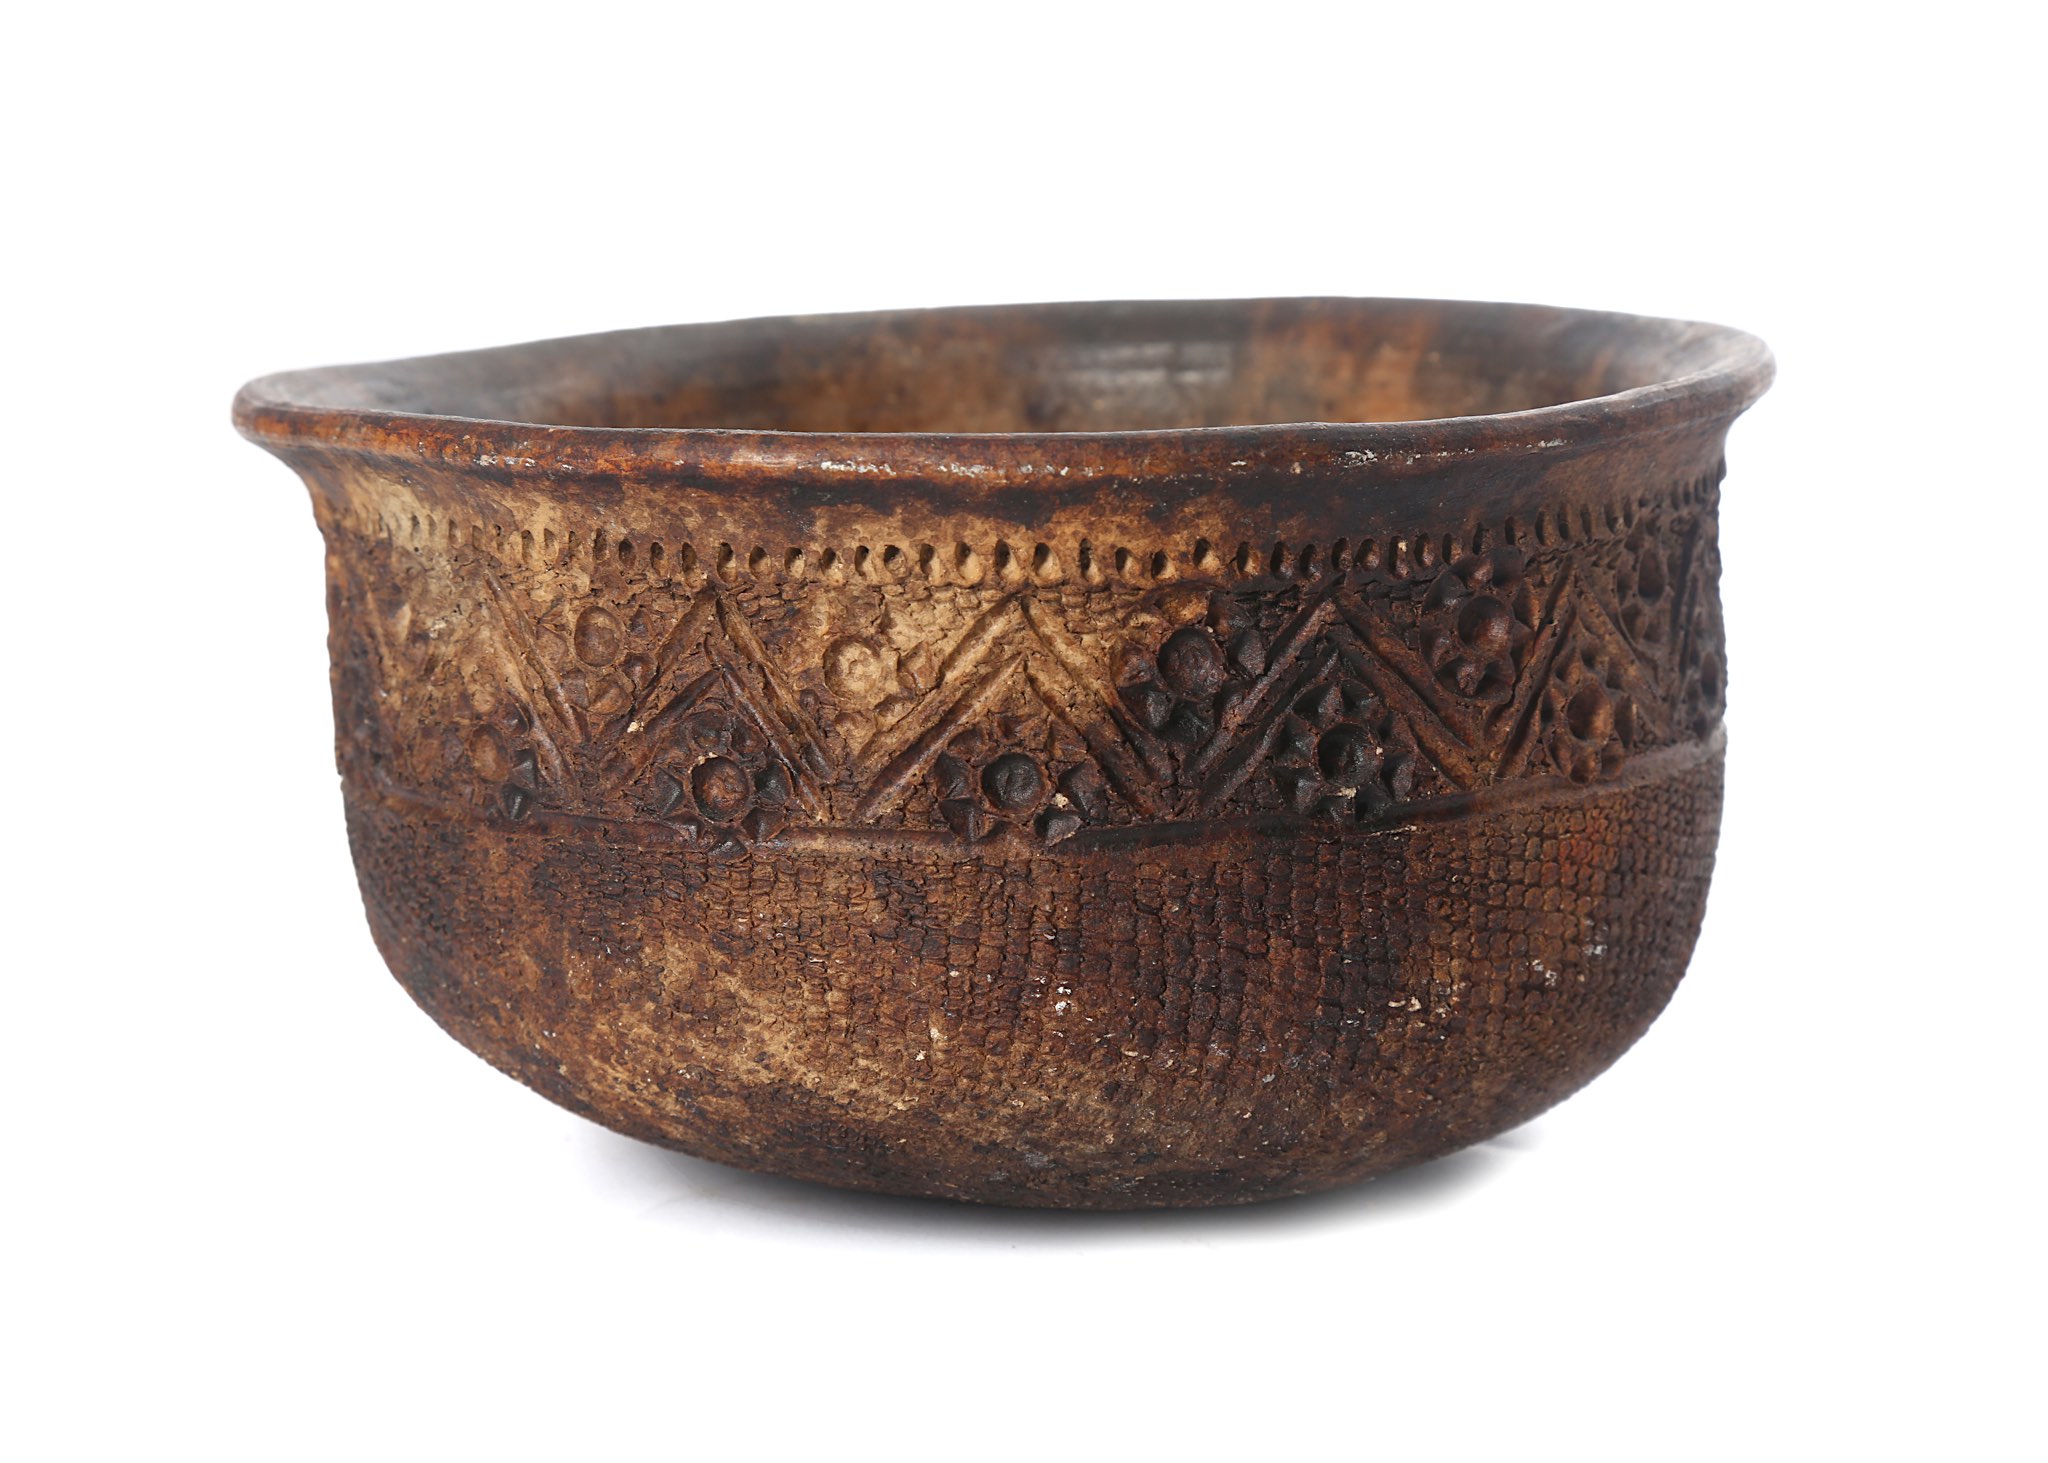 A PAPUA NEW GUINEA COOKING POT A traditional clay pot for cooking on an open fire, with stippled and